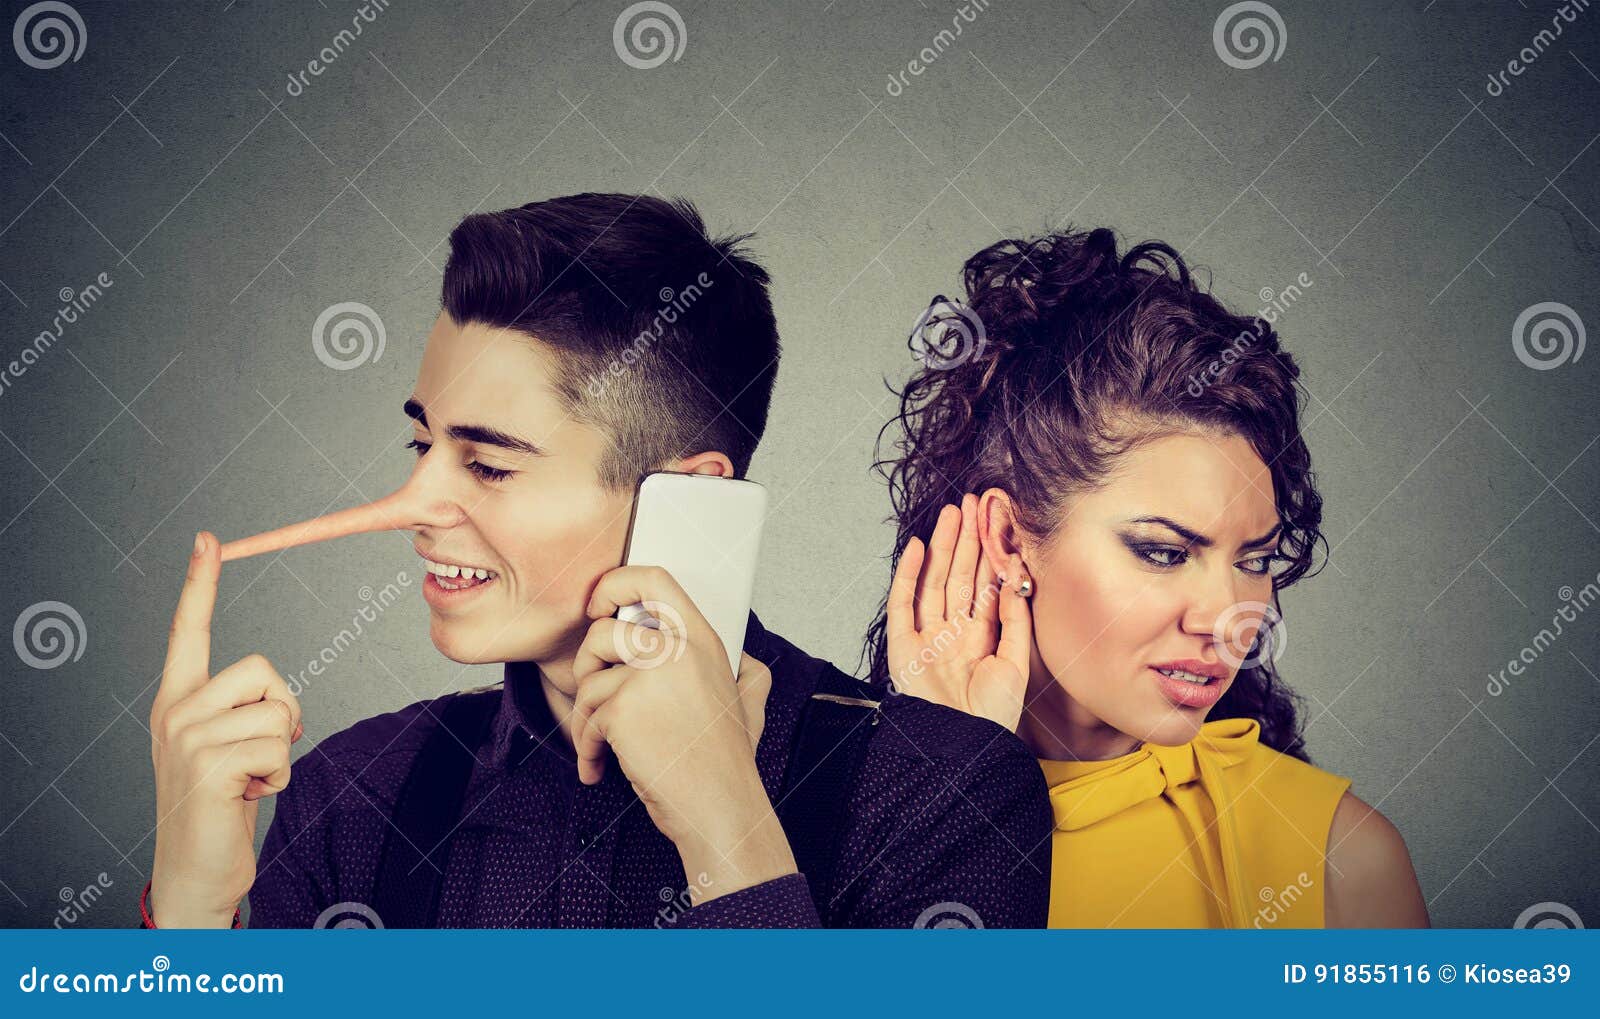 curious worried woman secretly listening to a happy man liar talking on mobile phone with his lover